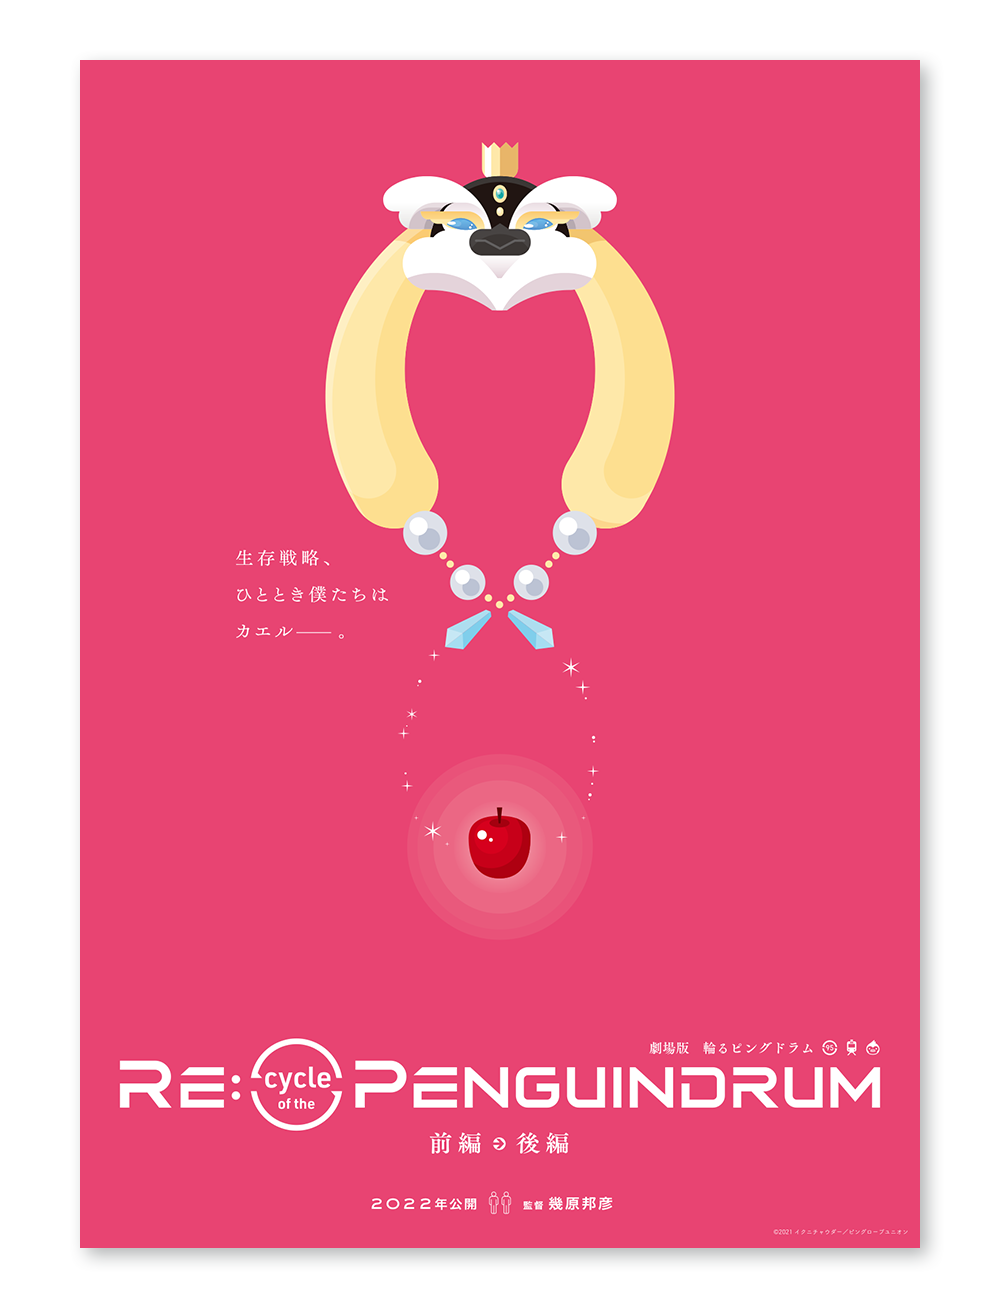 RE:Cycle of the PENGUINDRUM ティザー　ポスター1